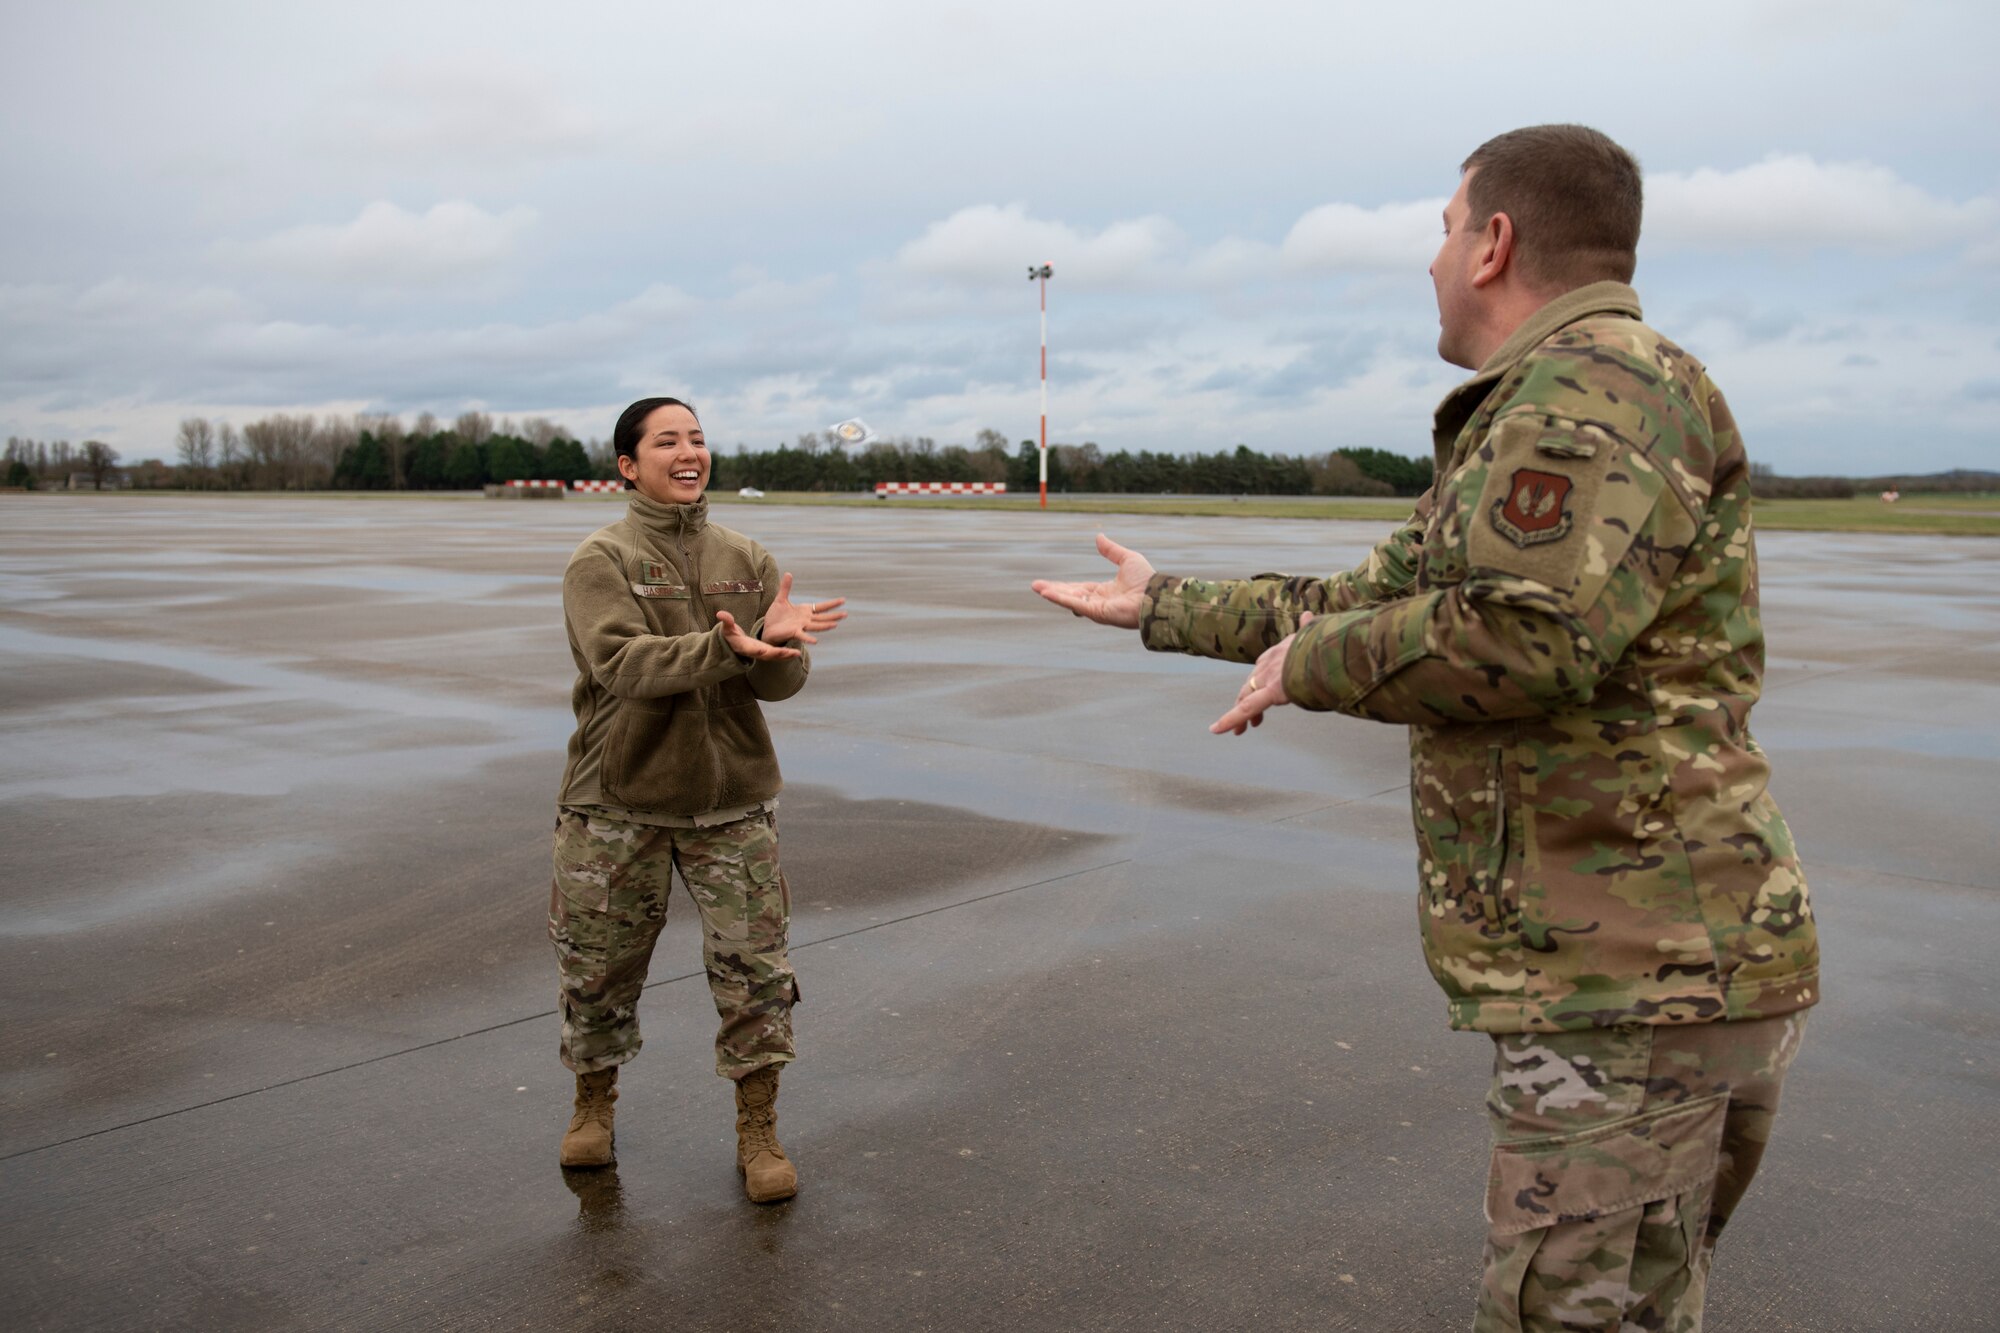 U.S. Air Force Col. Kurt Wendt, right, 501st Combat Support Wing commander, tosses a coin of recognition to Capt. Jody Hasebe, left, 420th Air Base Squadron operations and installation reception officer, for organizing the visit at Royal Air Force Fairford, England, Nov. 18. 2020. Allied Land Command (LANDCOM) conducted a combat readiness evaluation on the NATO Headquarters Allied Rapid Reaction Corp (ARRC) during LOLE20, which took place at RAF Fairford and South Cerney, England, Nov. 9-19, 2020. This was a complex multi-domain exercise designed to test the war-fighting capabilities of the ARRC in a COVID-19 environment including combat operations. LOLE20 was a key NATO exercise to validate and certify the Gloucester-based ARRC as a NATO war-fighting corps at full operational readiness, capable of commanding up to 120,000 multinational troops across a full spectrum of military operations. (U.S. Air Force photo by Senior Airman Jennifer Zima)